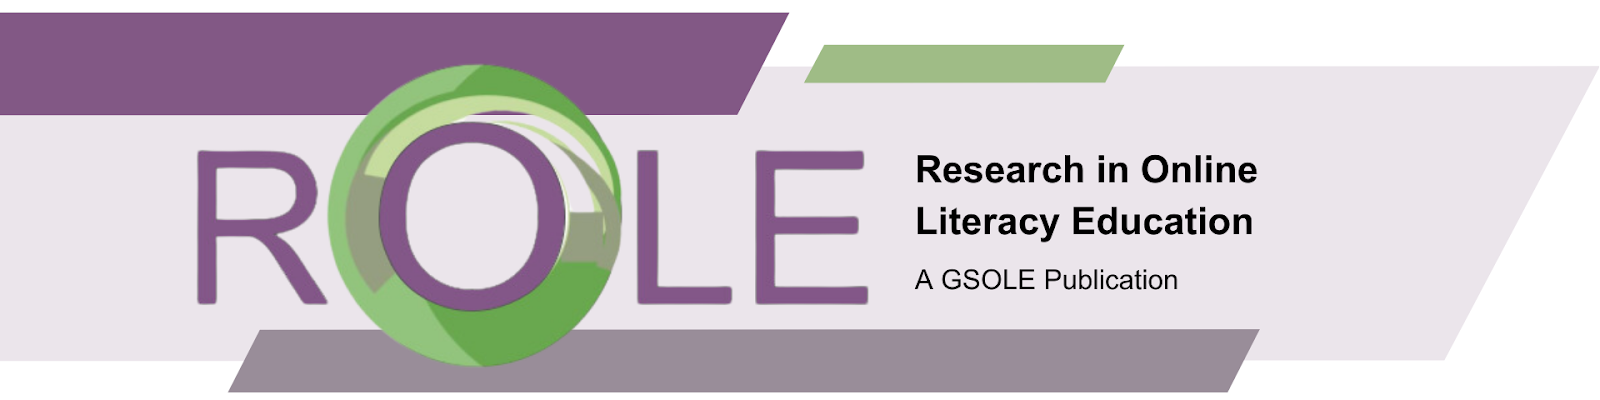 Image of ROLE header with green, purple ROLE logo featuring a swirling green "O" and the acronym "ROLE' beside the text "Research in Online Literacy Education: A GSOLE Publication"